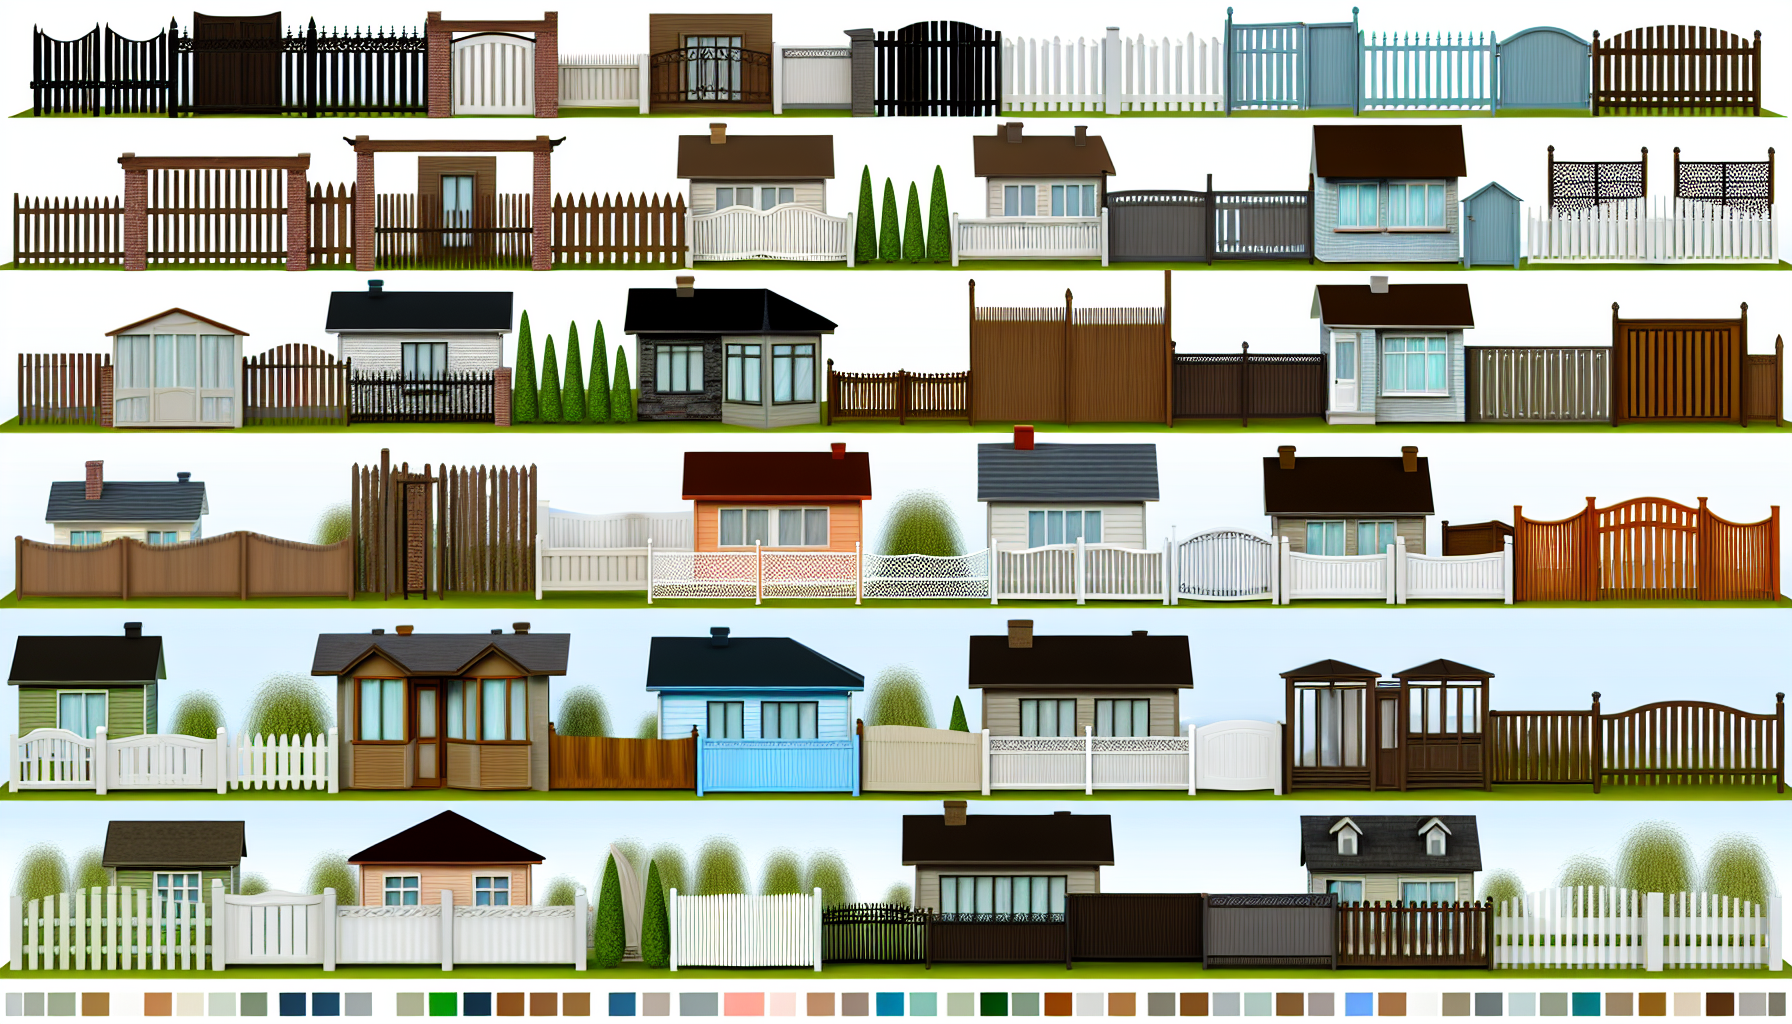 Different fence designs and materials